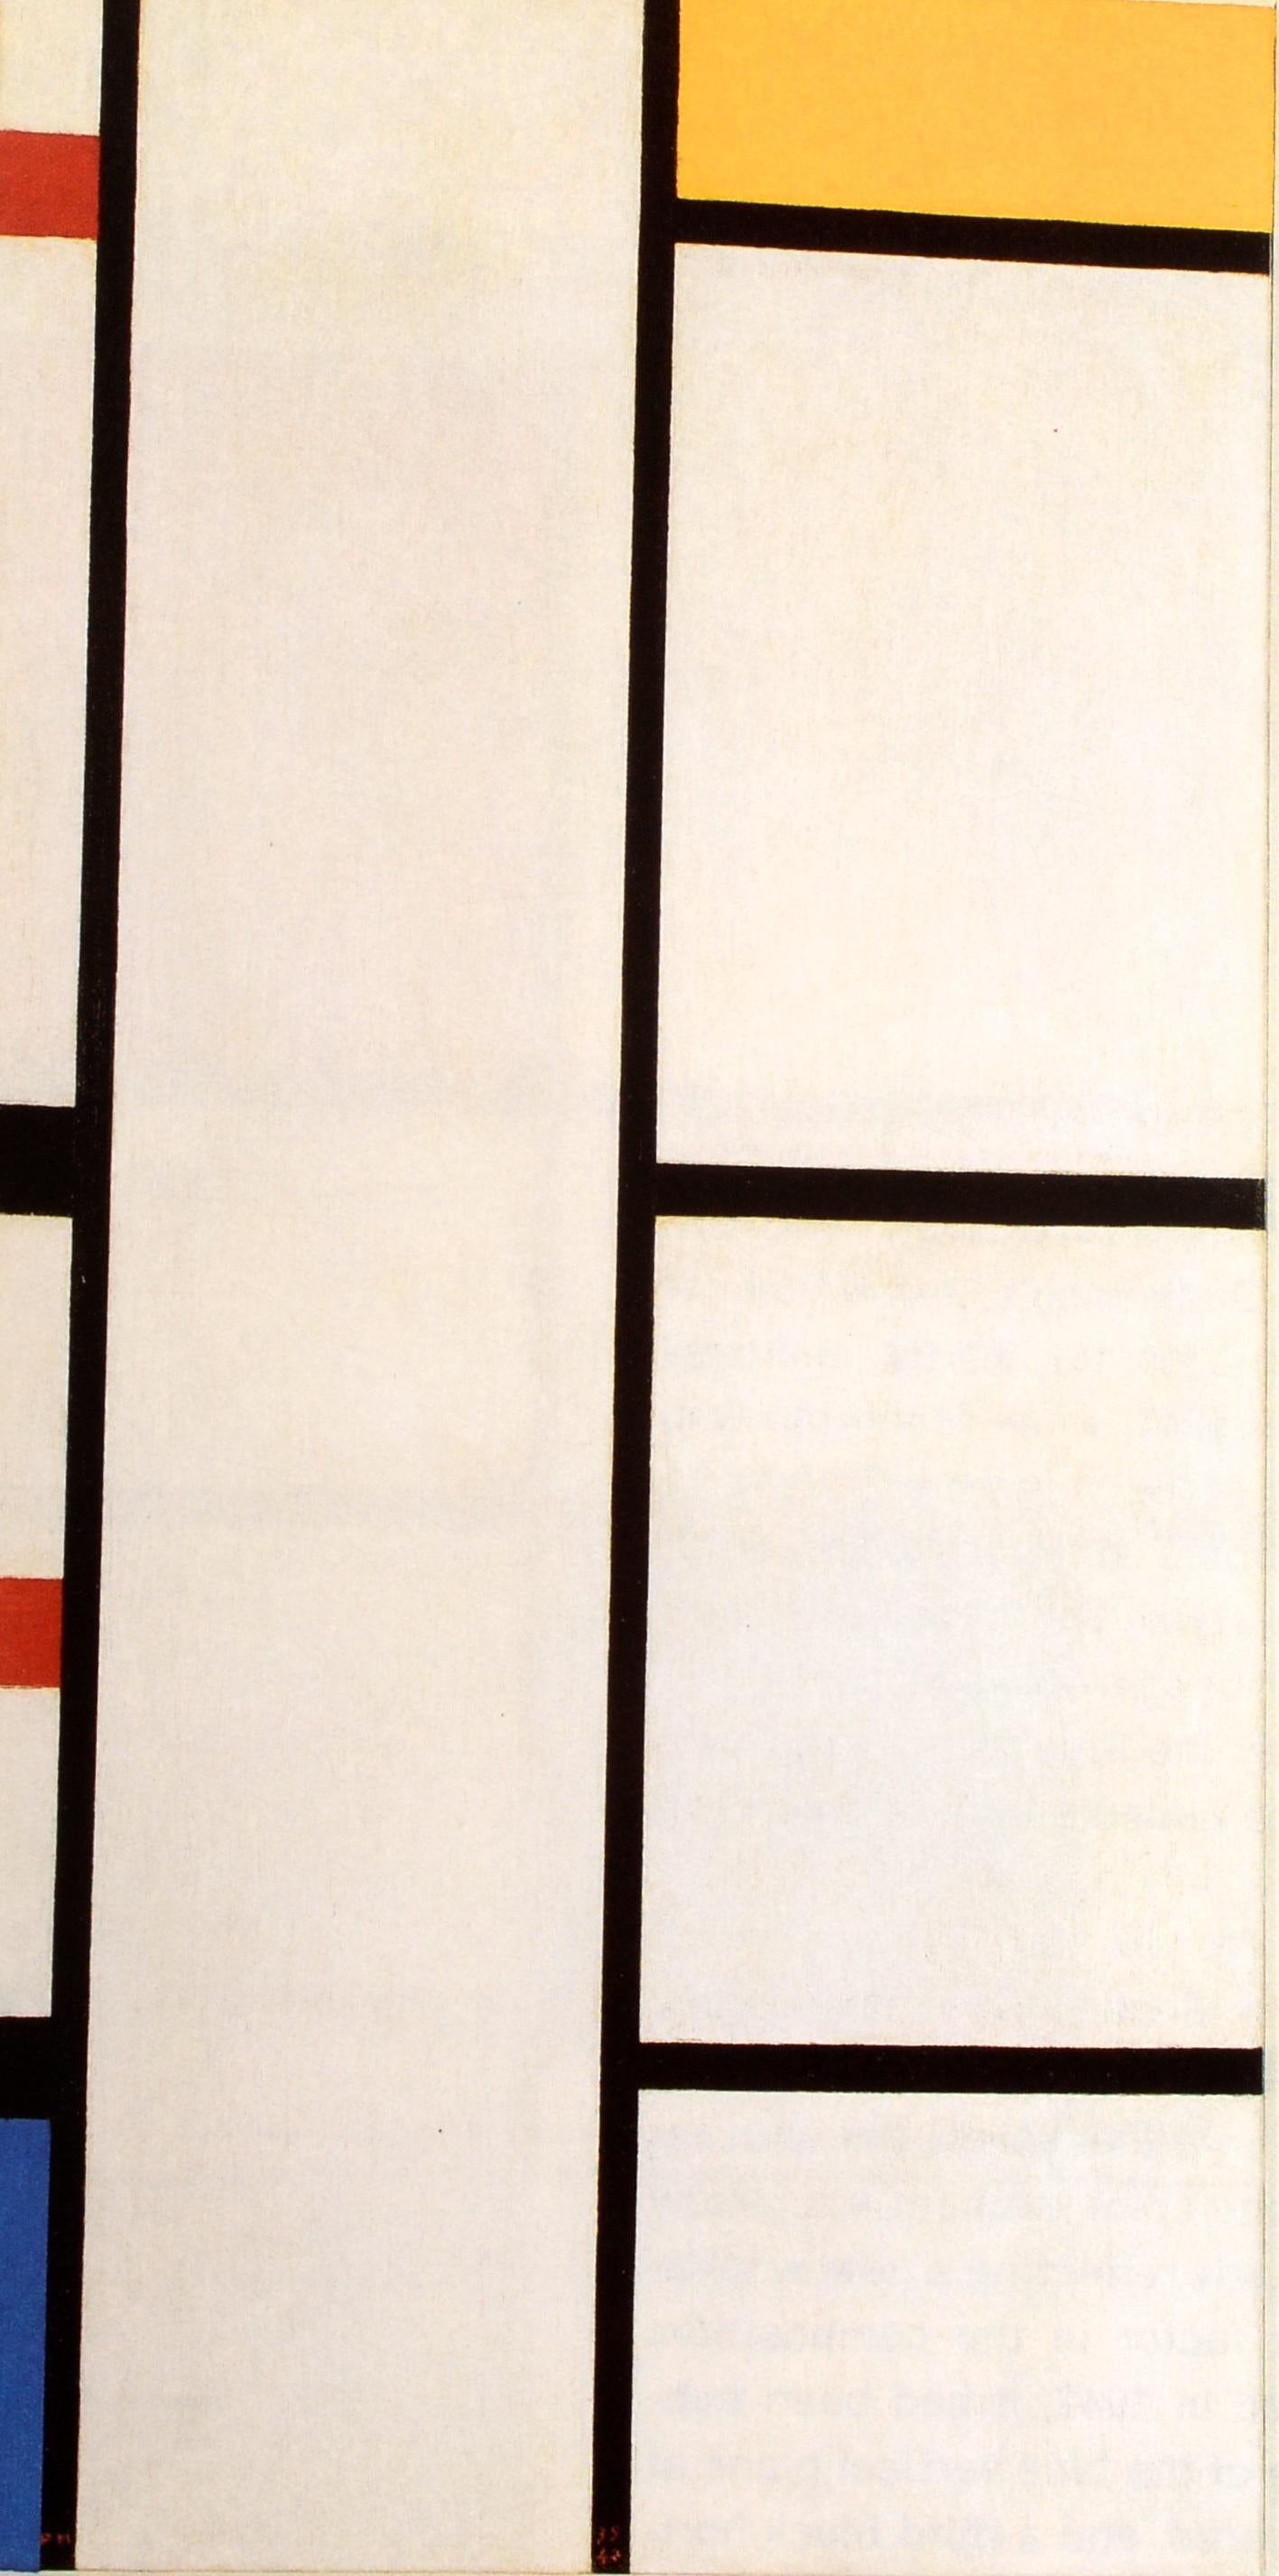 Piet Mondrian, by Yve-Alain Bois, 1st Ed Exhibition Catalog In Good Condition For Sale In valatie, NY